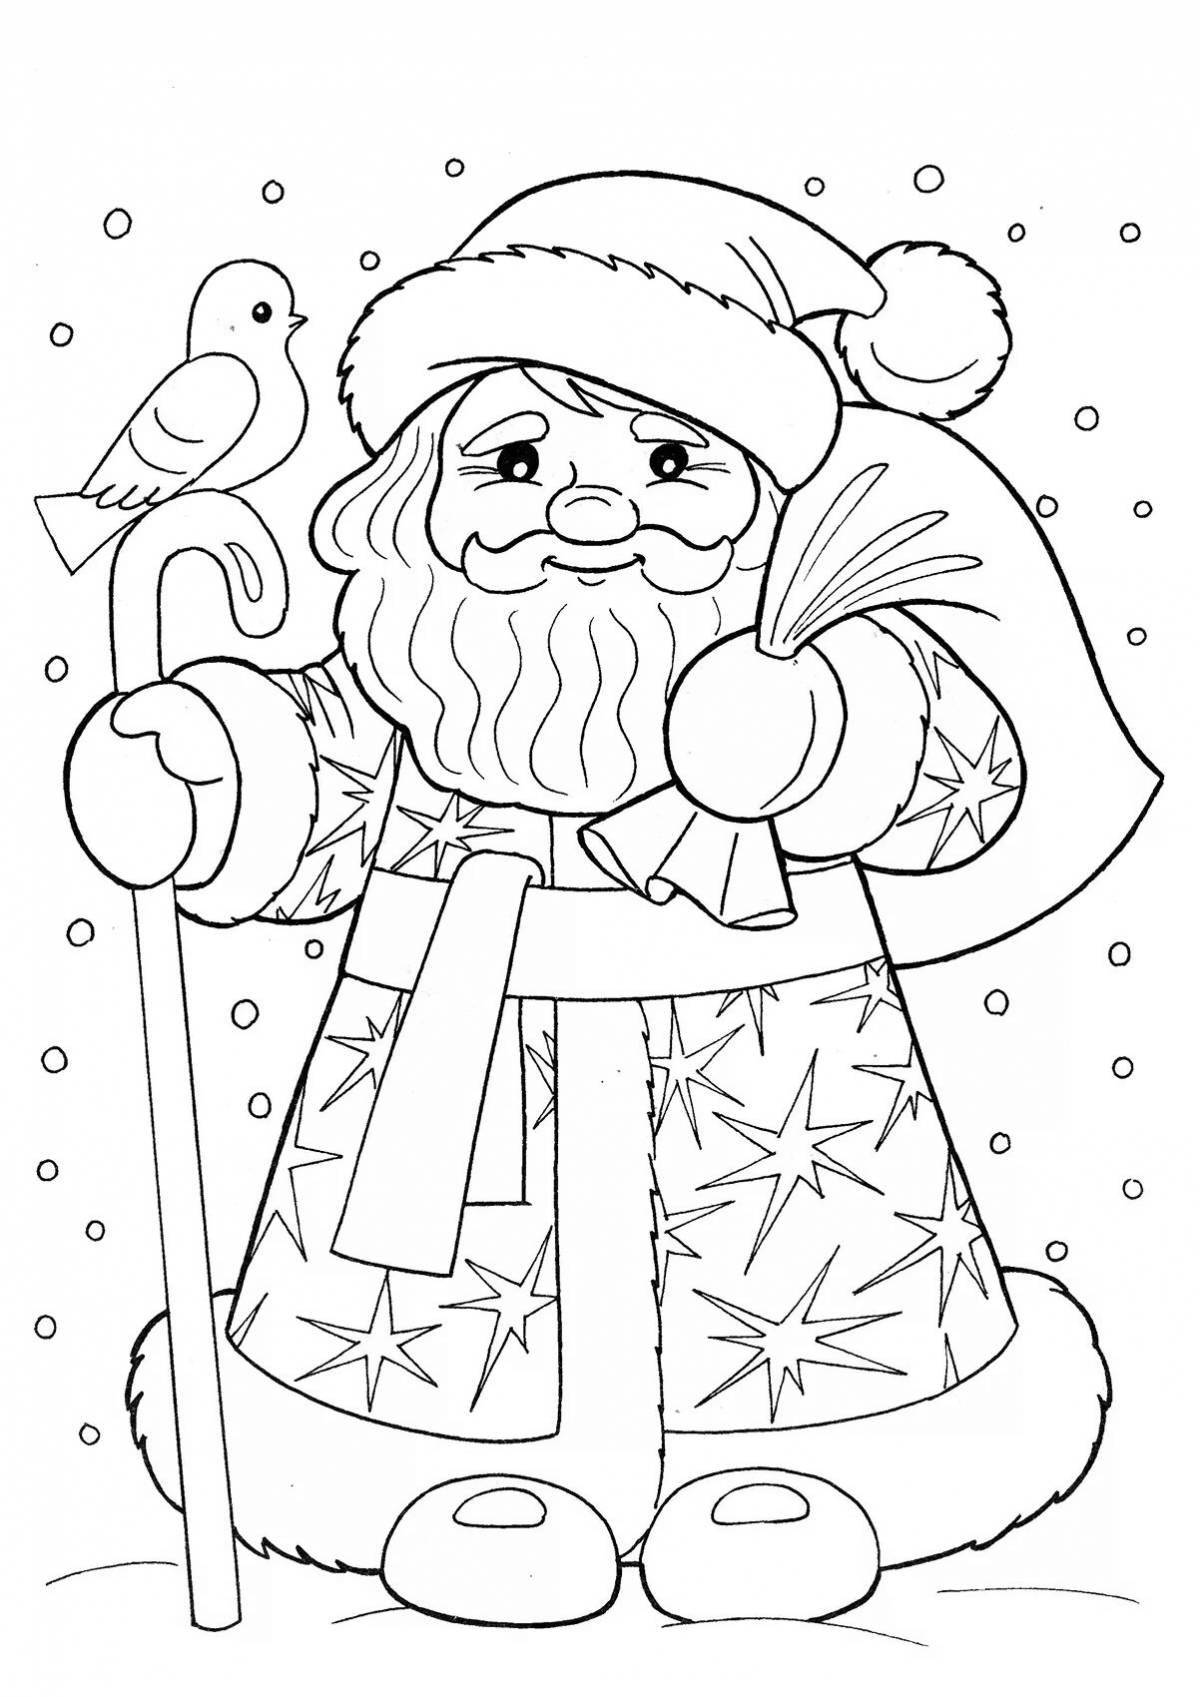 Colorful Christmas coloring book for kids